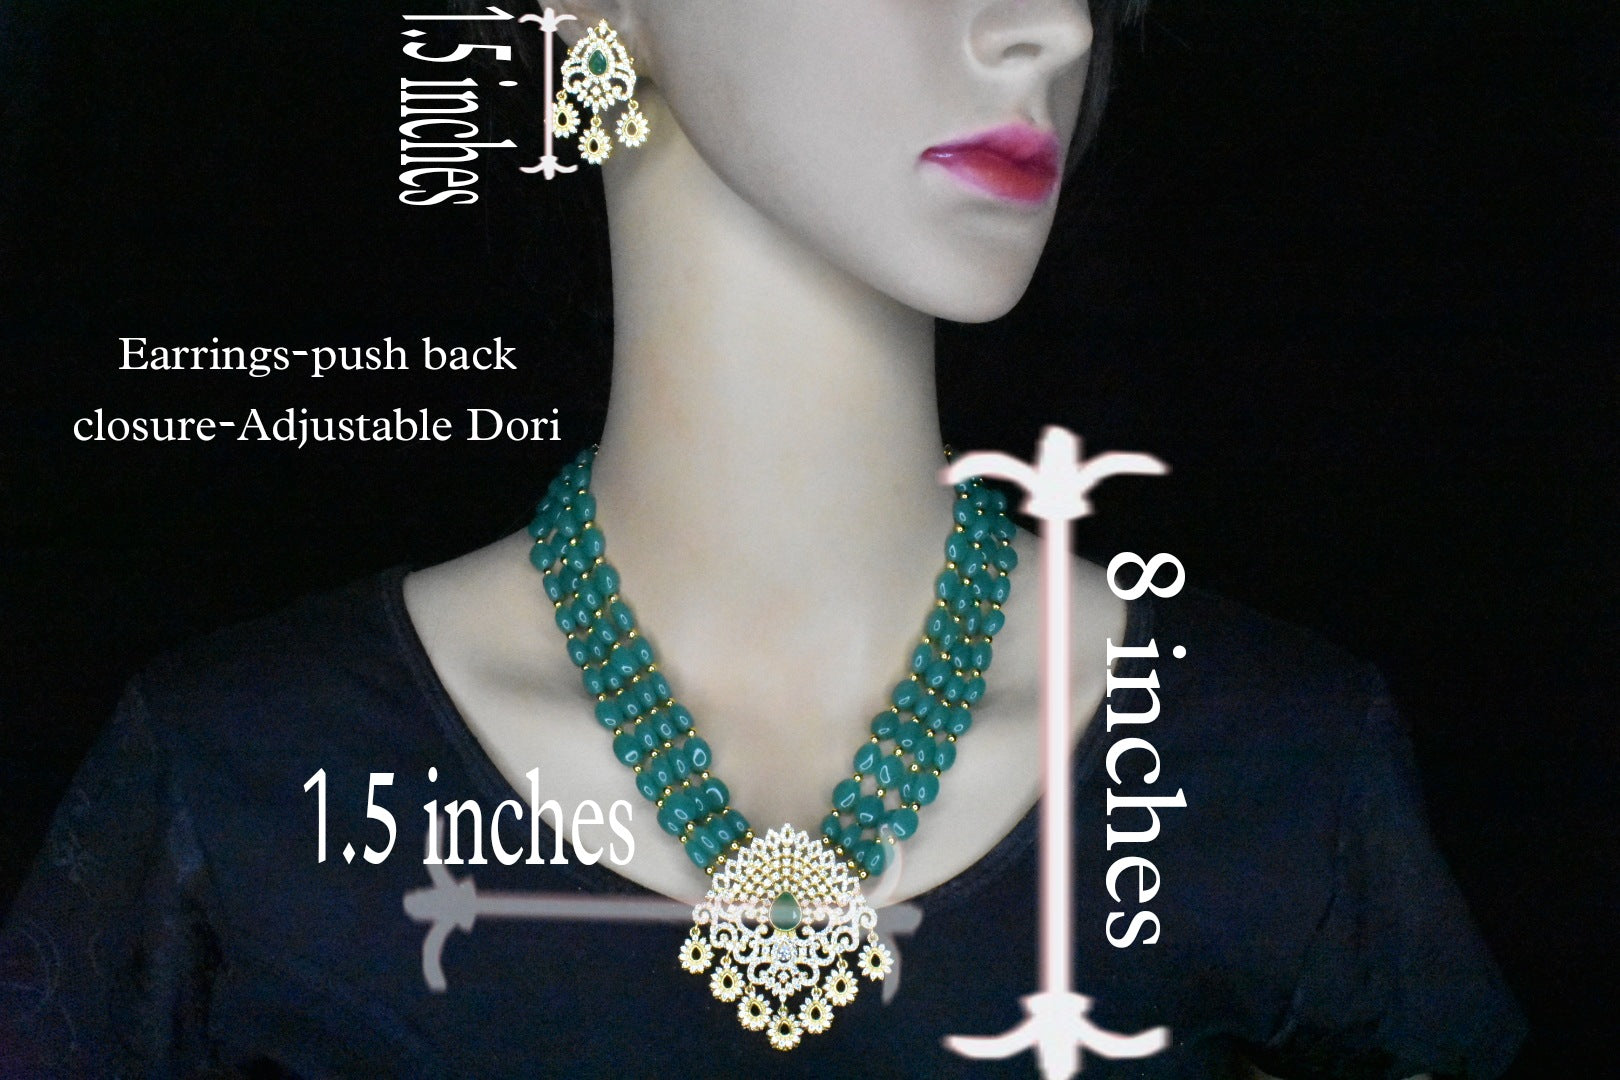 Emerald beads necklace with Cz pendant
Set